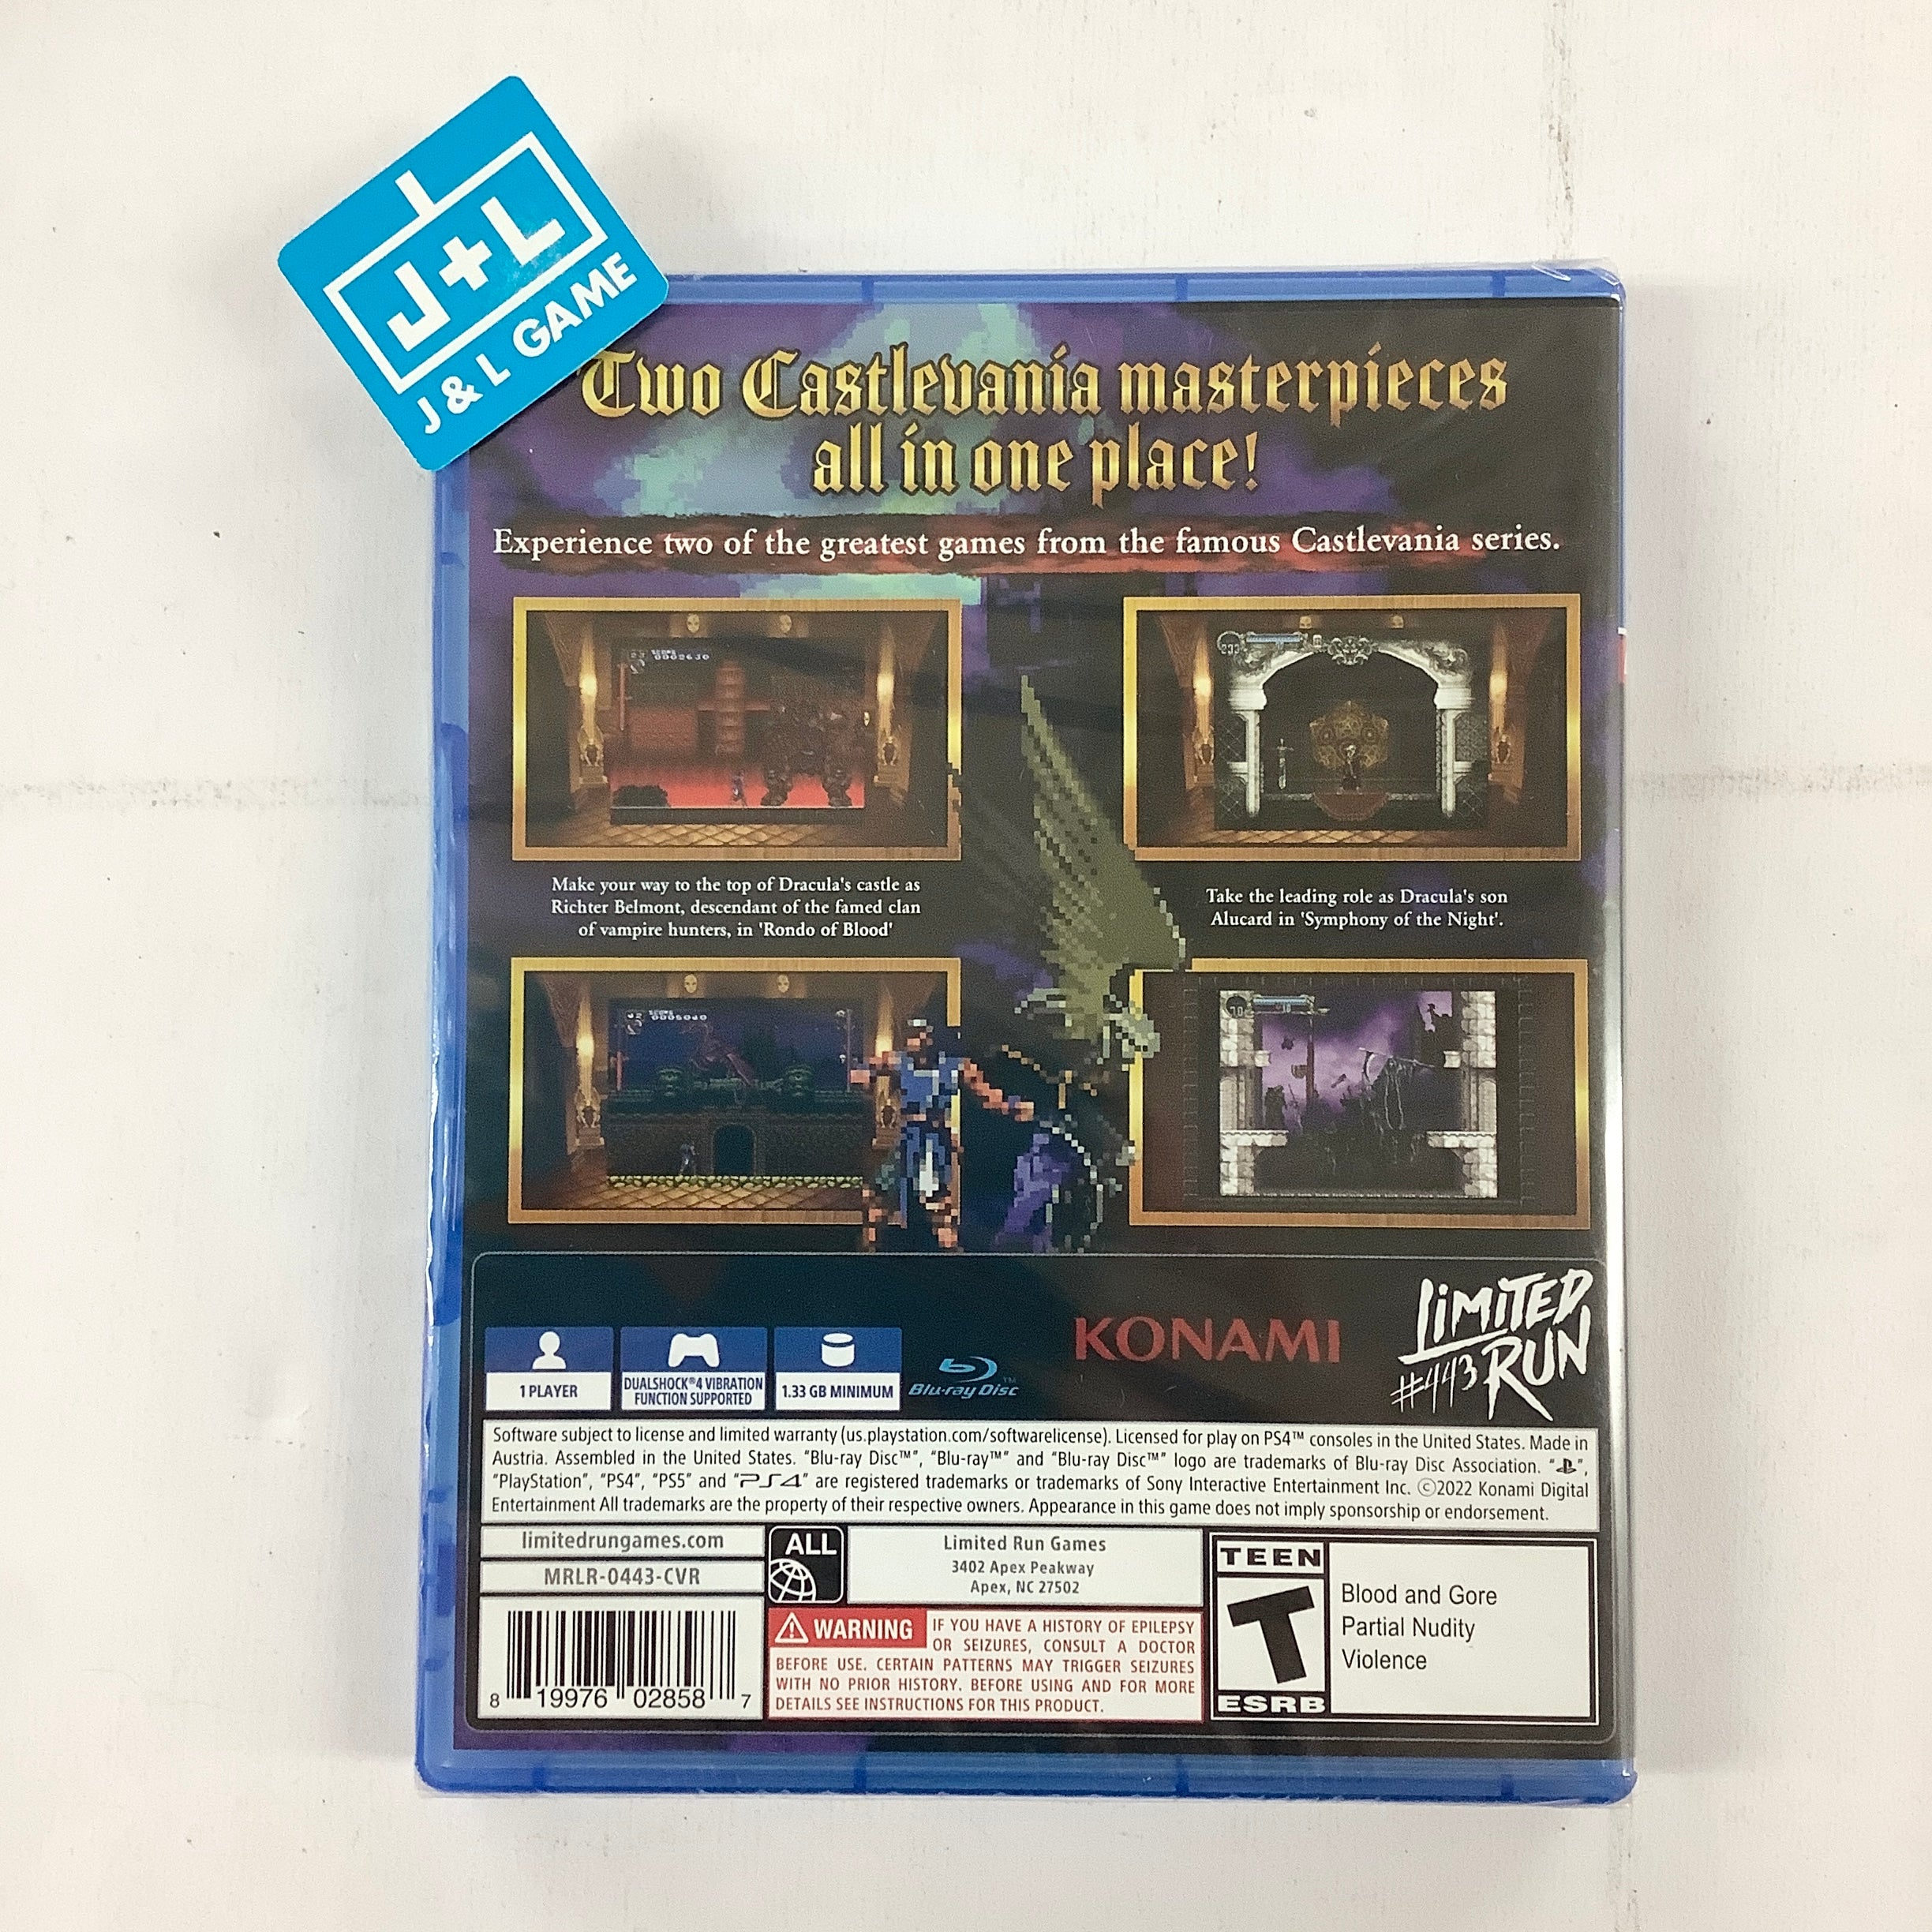 Castlevania: Requiem (Limited Run #443) - (PS4) PlayStation 4 Video Games Limited Run Games   